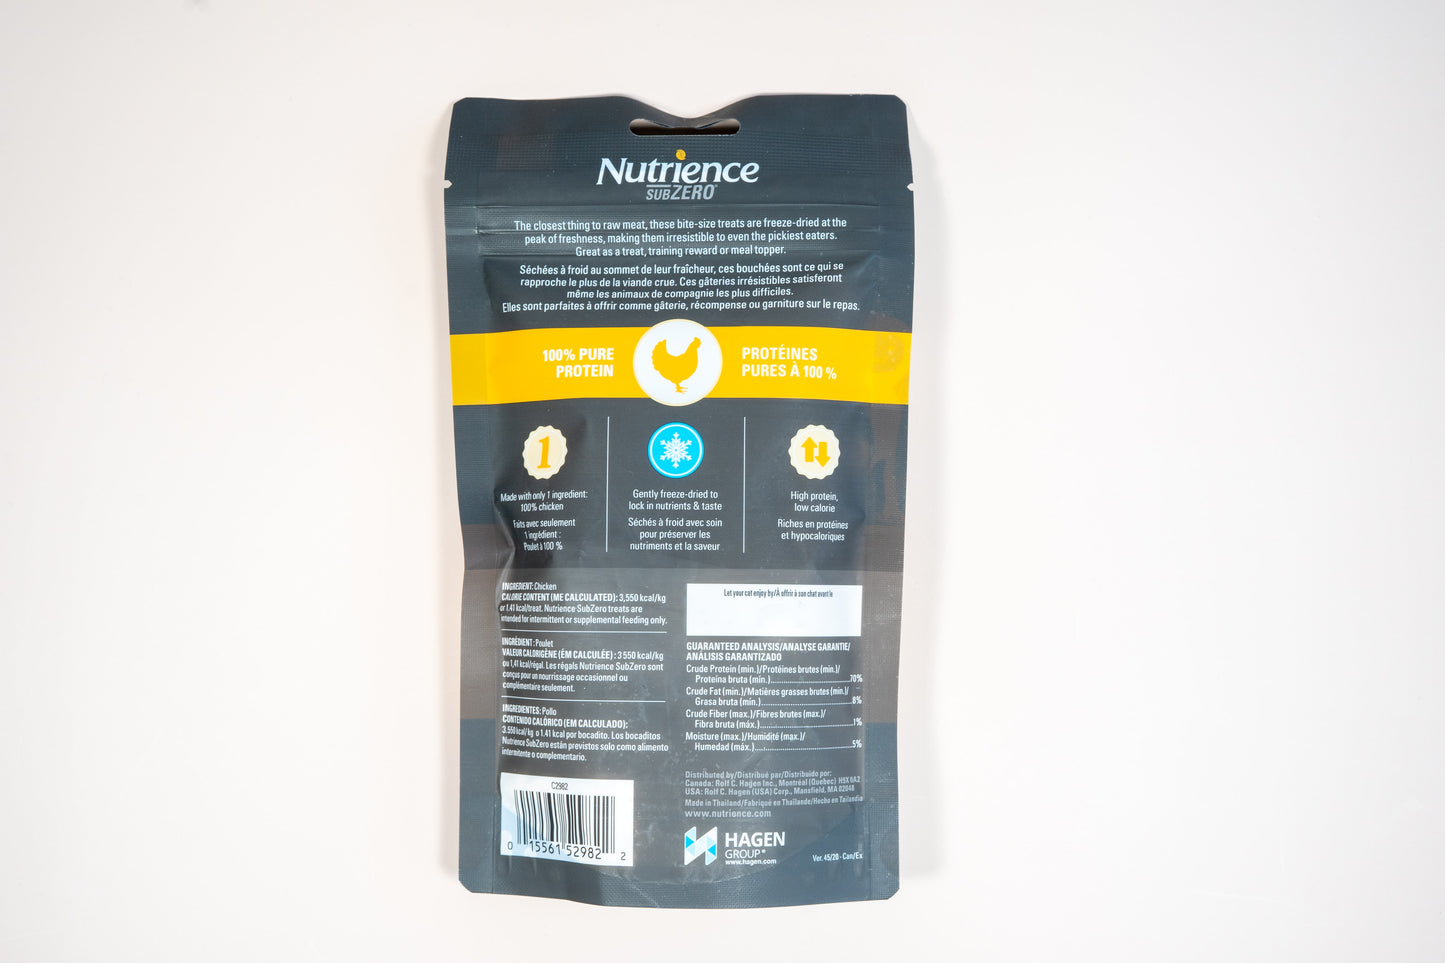 The closest thing to raw meat, Nutrience SubZero chicken flavor is a great treat for training rewart or meal topper.